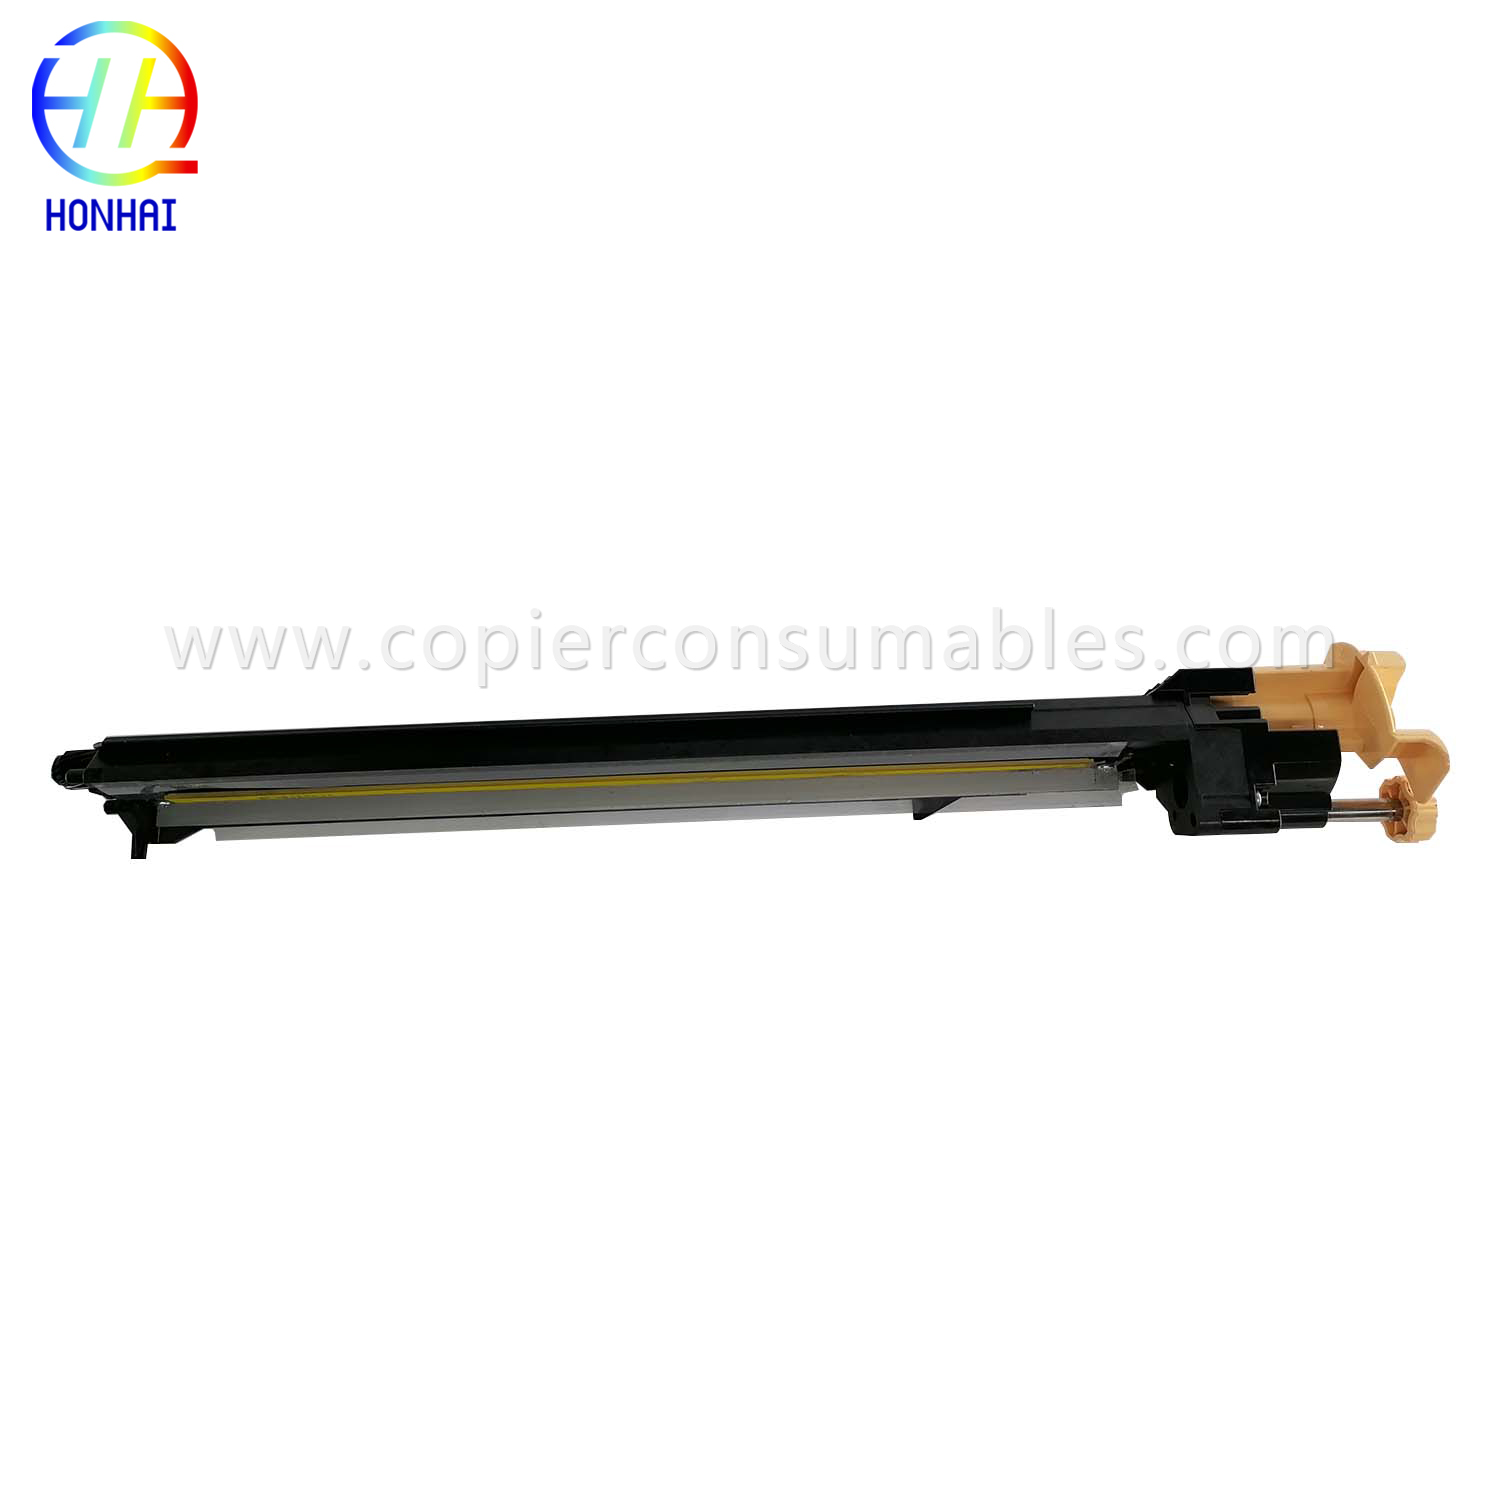 Transfer Belt Cleaning Assembly for Xerox C2270 C2275 C3370 C3371 C3373 C3375 042K94851(1) 拷贝